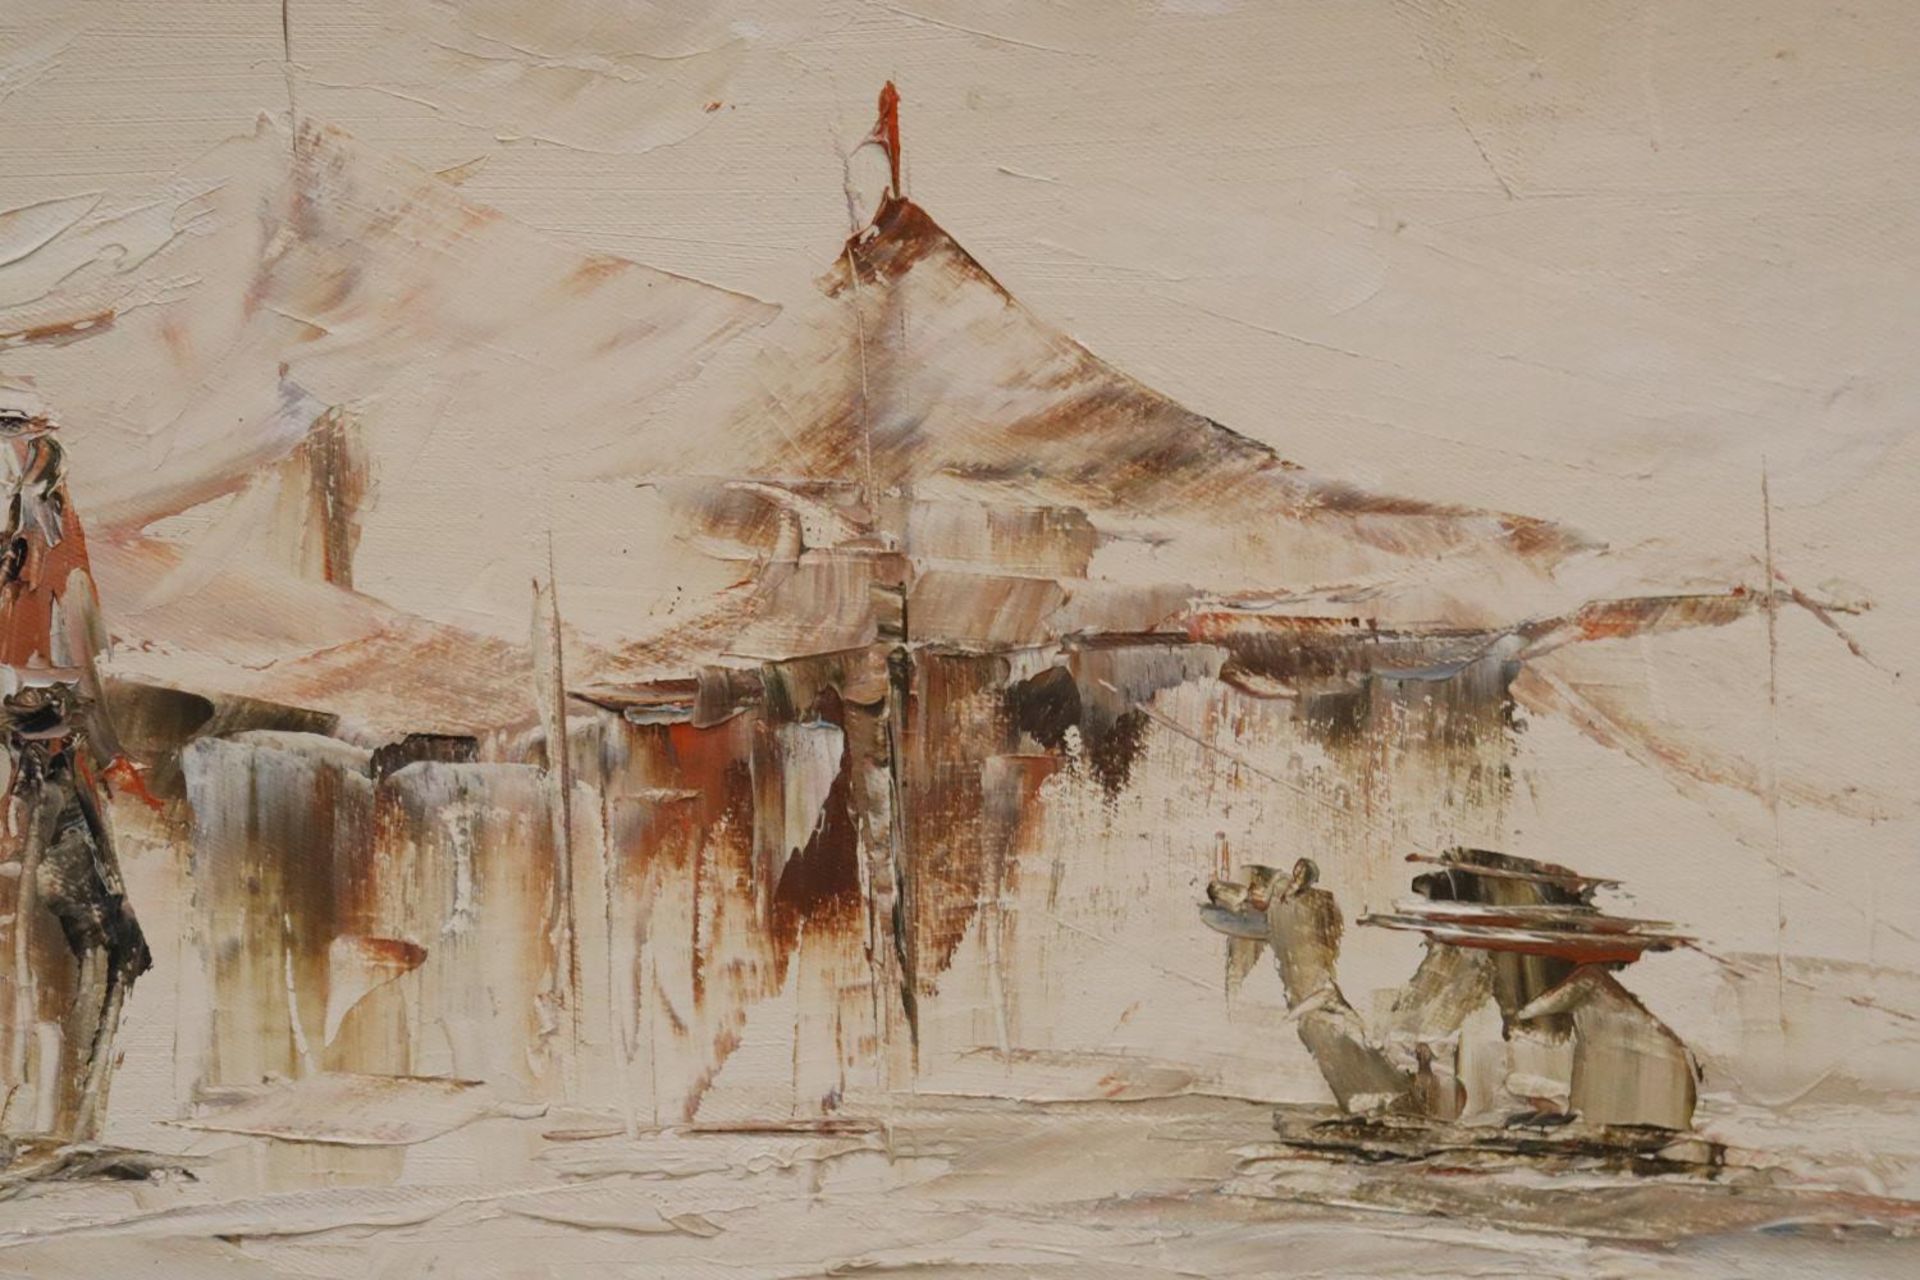 AN OIL ON BOARD OF A DESERT SCENE WITH CAMELS, ARABS AND A TENT - Image 2 of 3